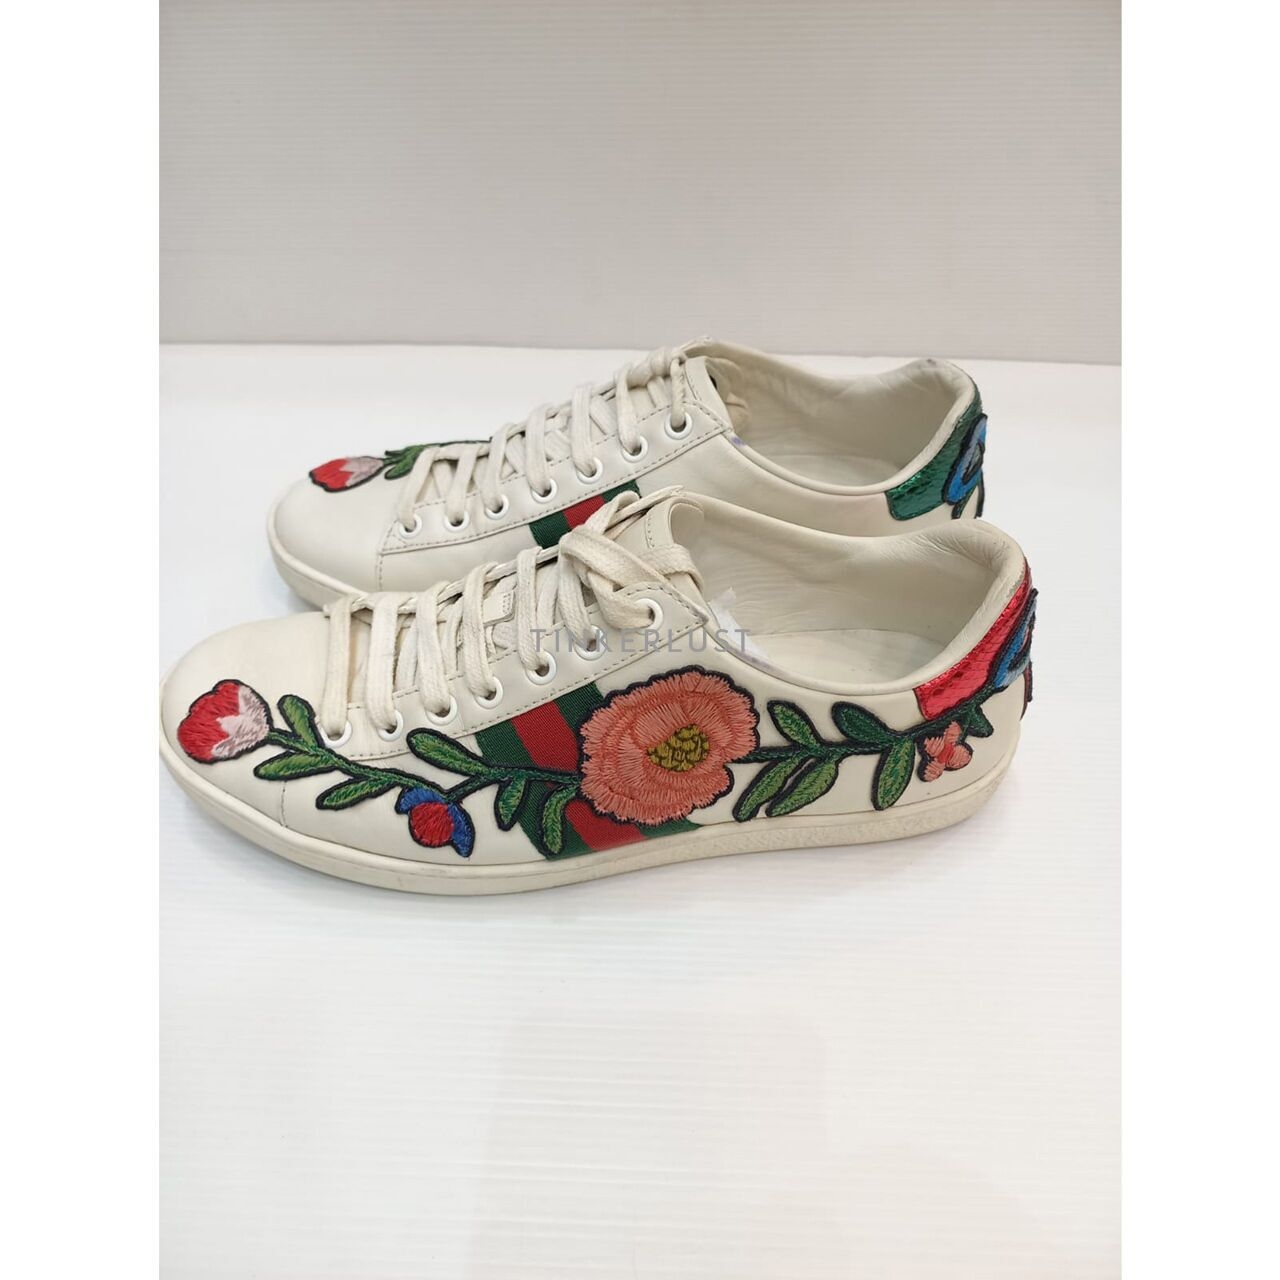 Gucci Ace Web Floral Embroidered White Leather Sneakers 